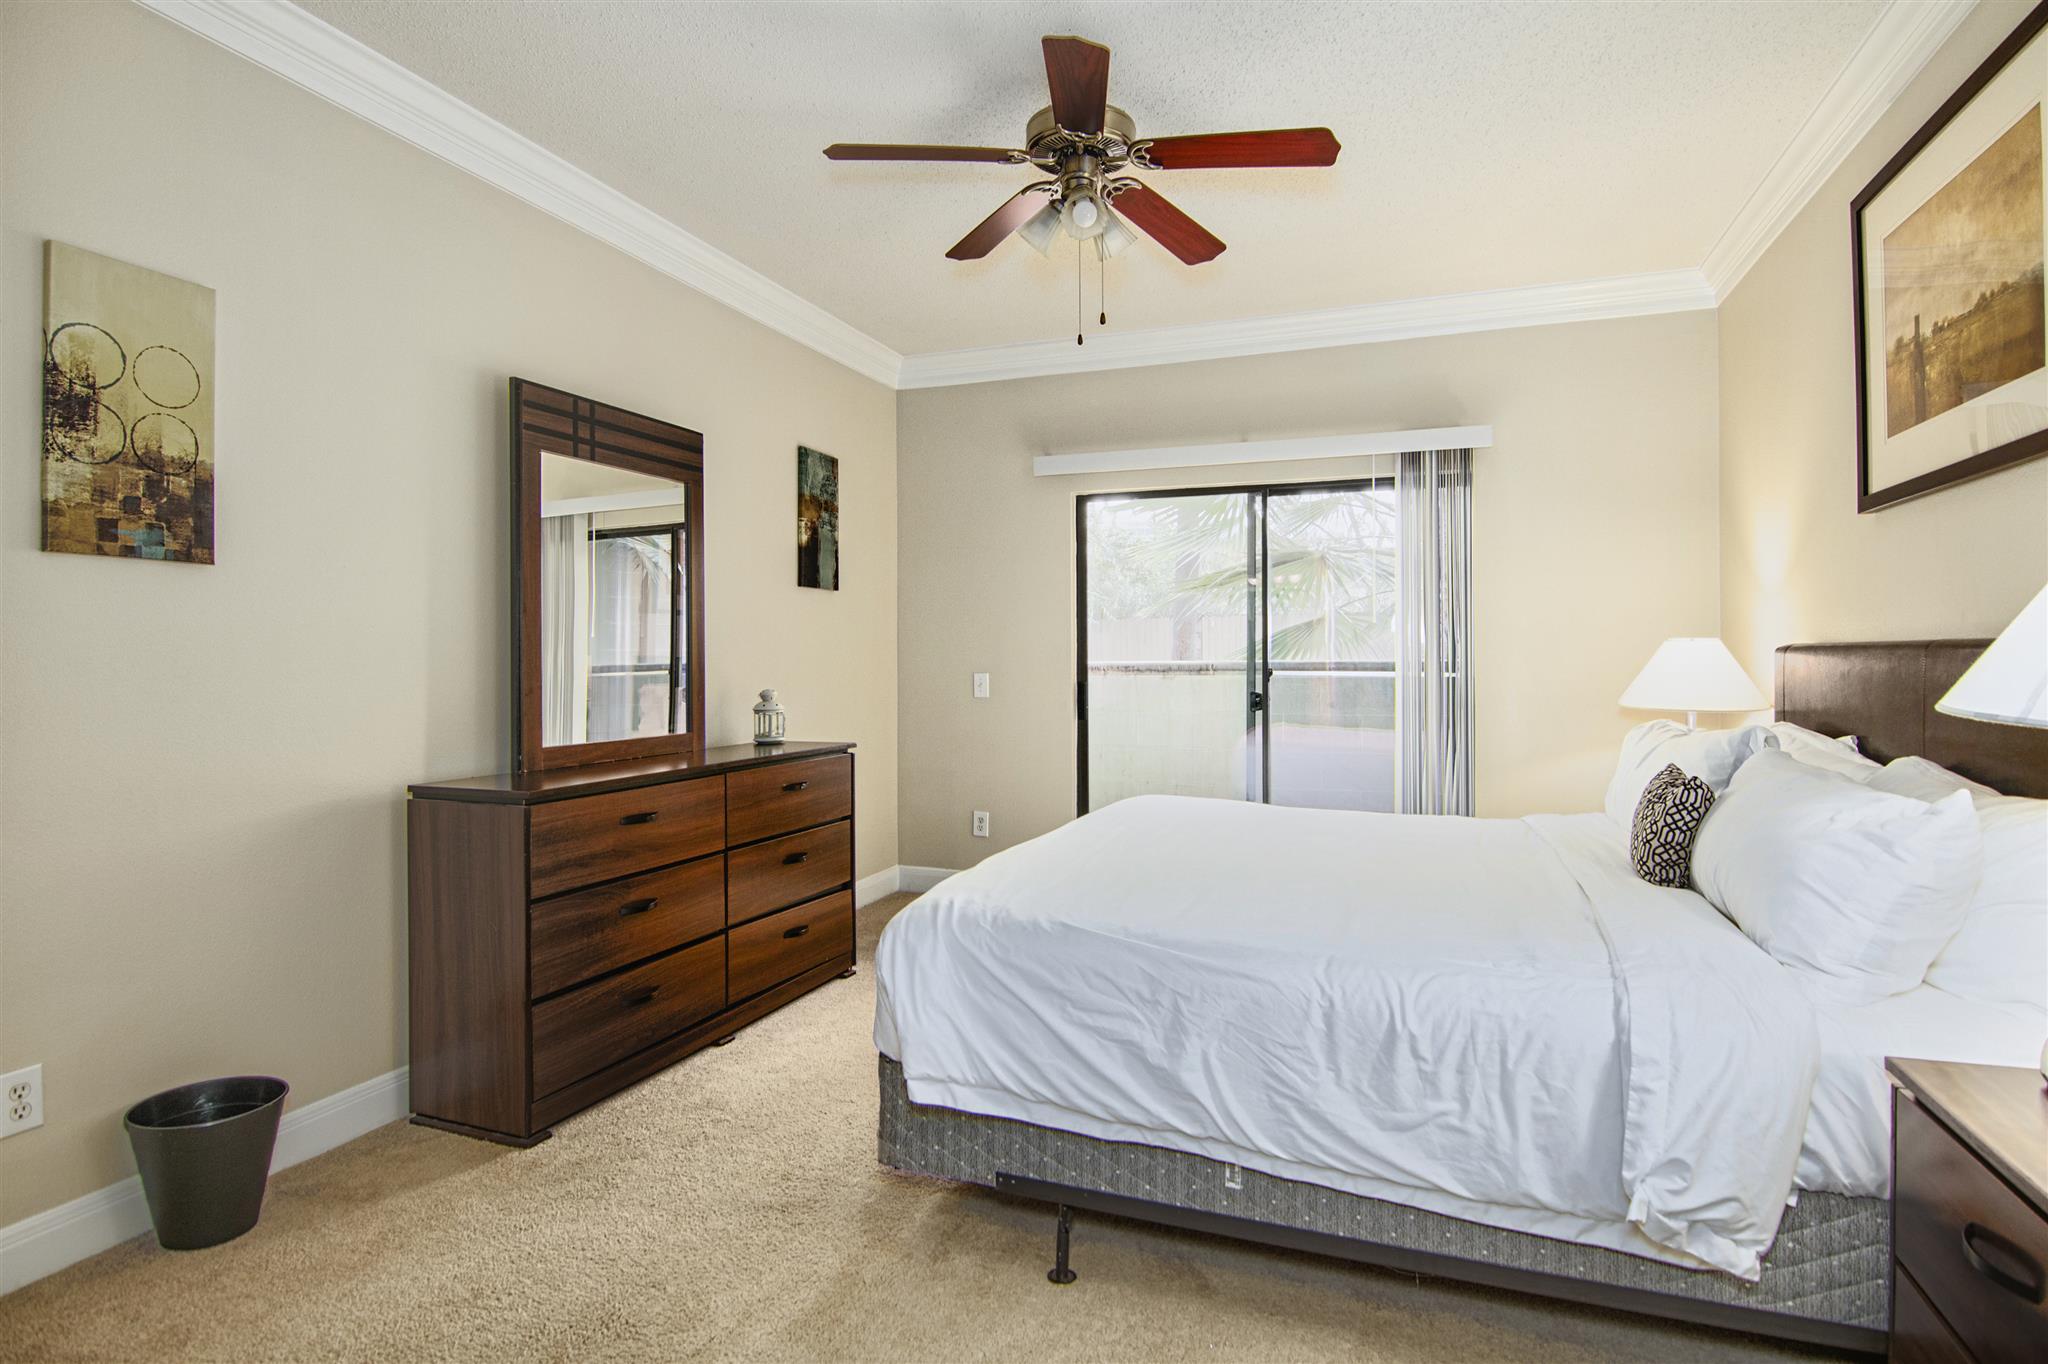 Furnished apartments & Corporate Housing | Galleria | Uptown